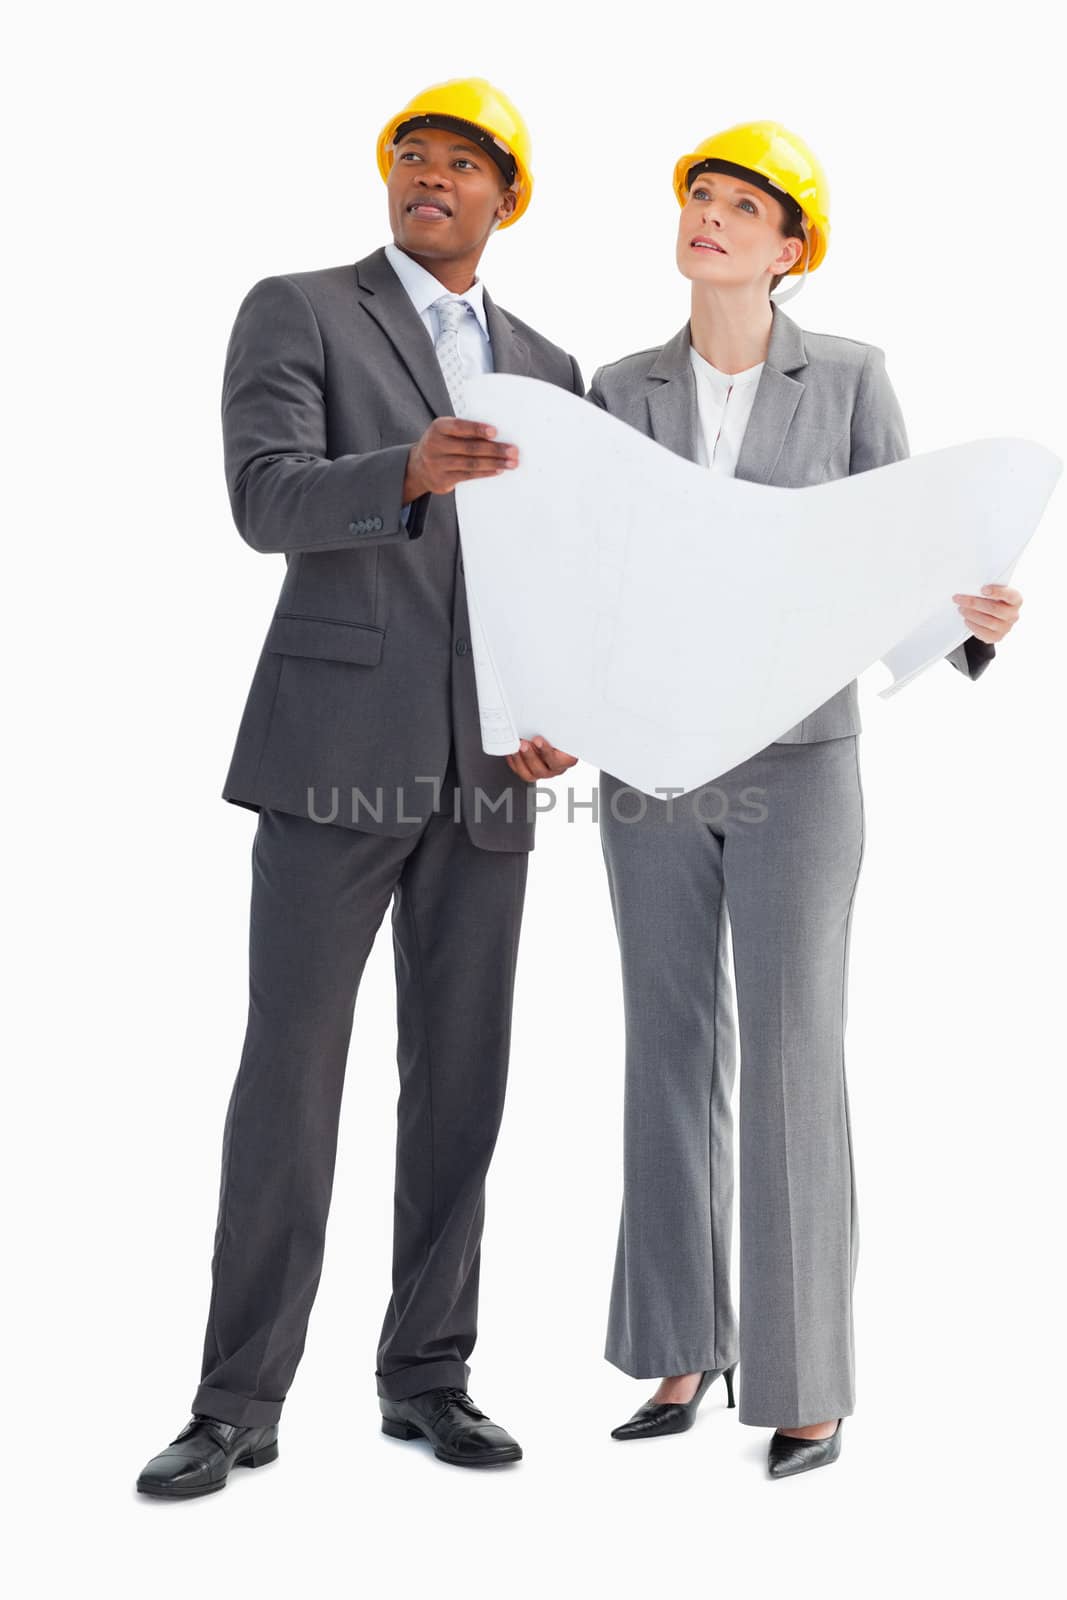 A businessman and woman wearing hard hats and holding a paper are looking up